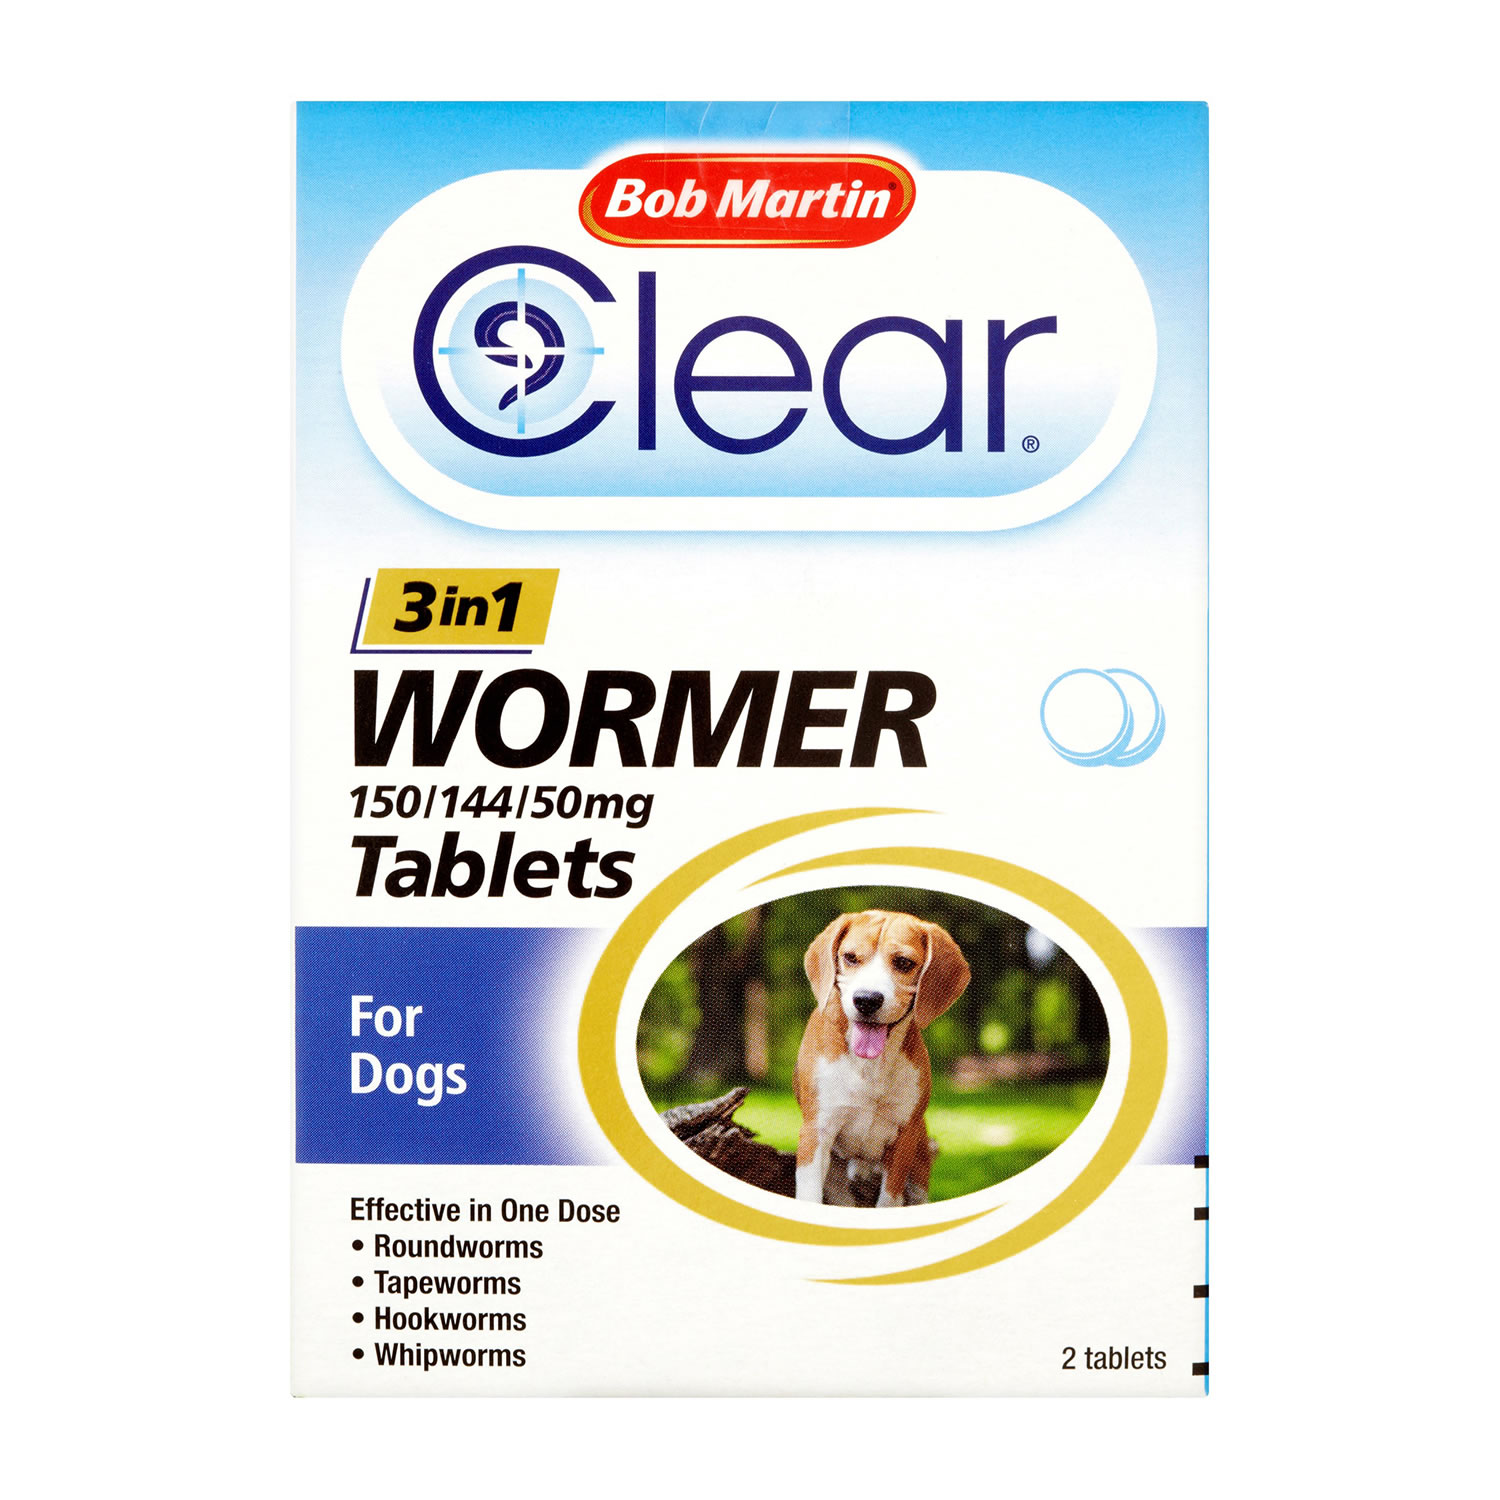 BOB MARTIN CLEAR 3-IN-1 WORMER TABLETS FOR DOGS BOB MARTIN CLEAR 3-IN-1 WORMER TABLETS FOR DOGS 2 PACK  2 PACK